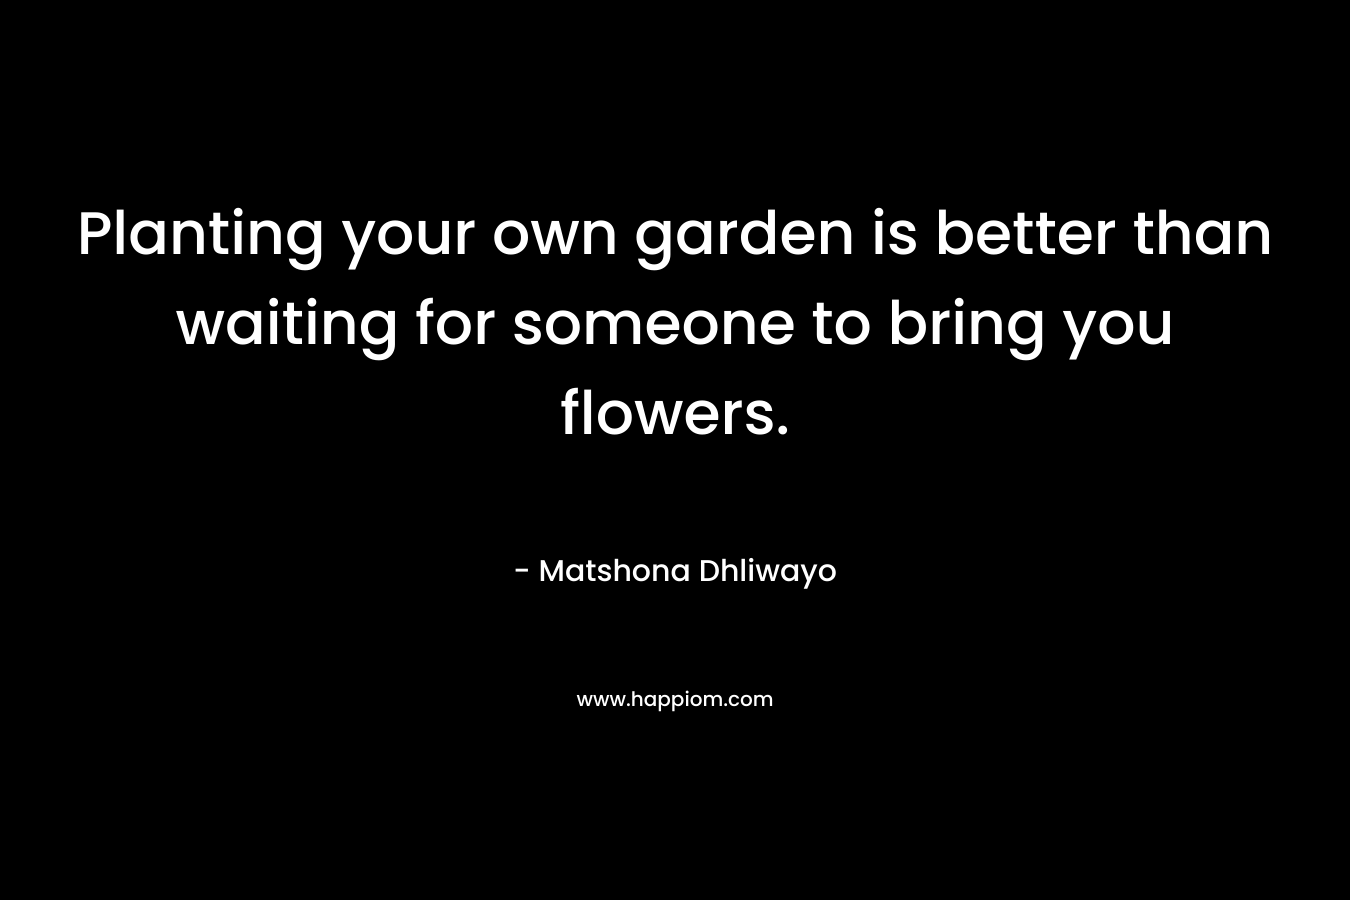 Planting your own garden is better than waiting for someone to bring you flowers. – Matshona Dhliwayo